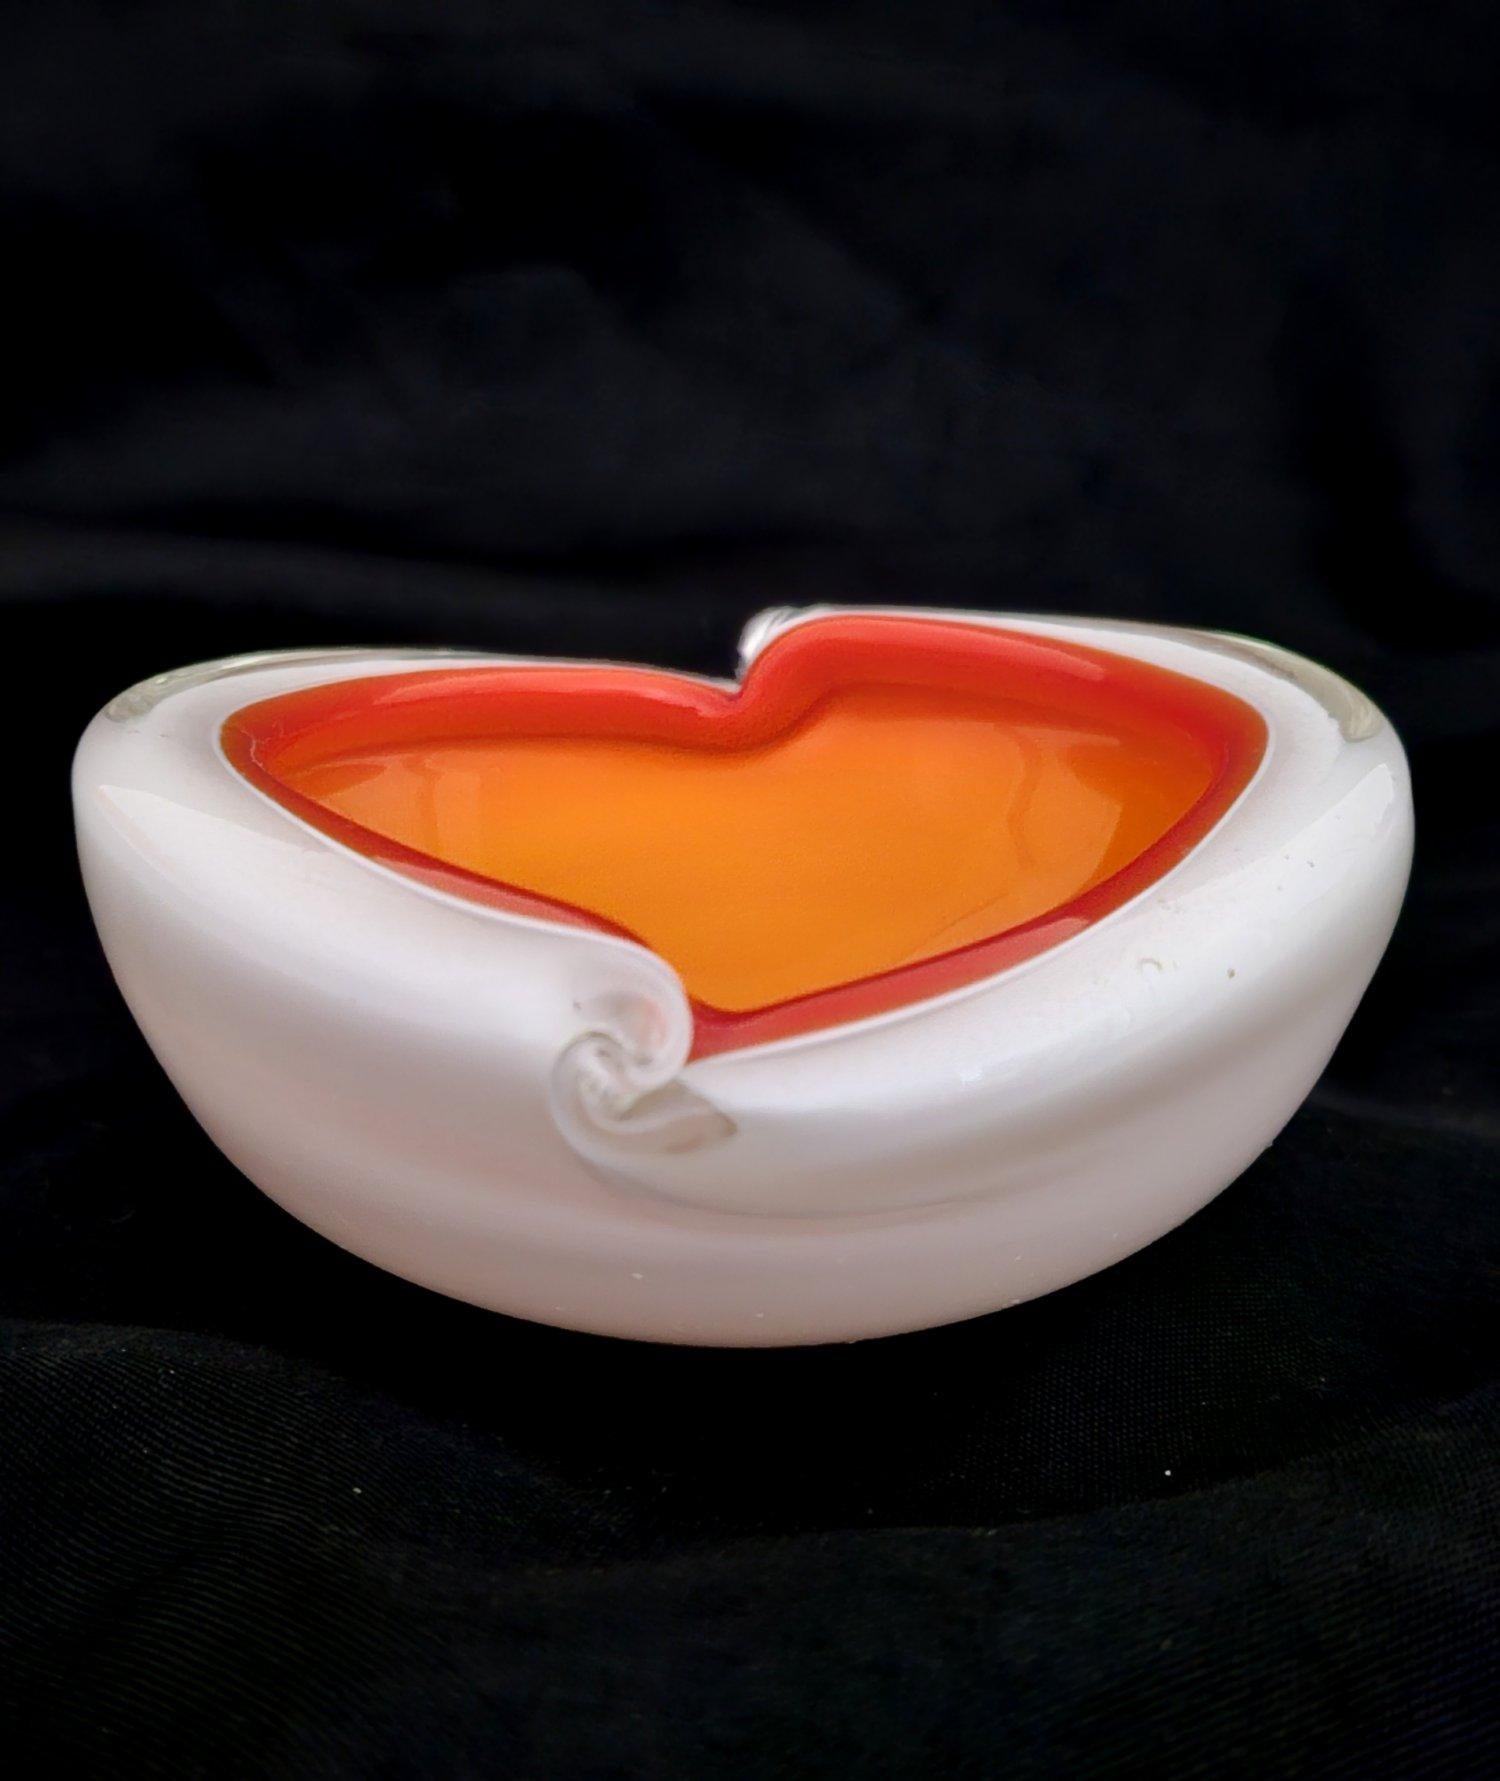 Alfredo Barbini Murano Cased Glass Bowl, Shell Motif
May function as an ashtray, bowl, trinket dish, or similar vessel, or as a unique art piece for display.
Colors: Orange, red, & white
Type: Hand blown glass
Design: Shell / Biomorphic/